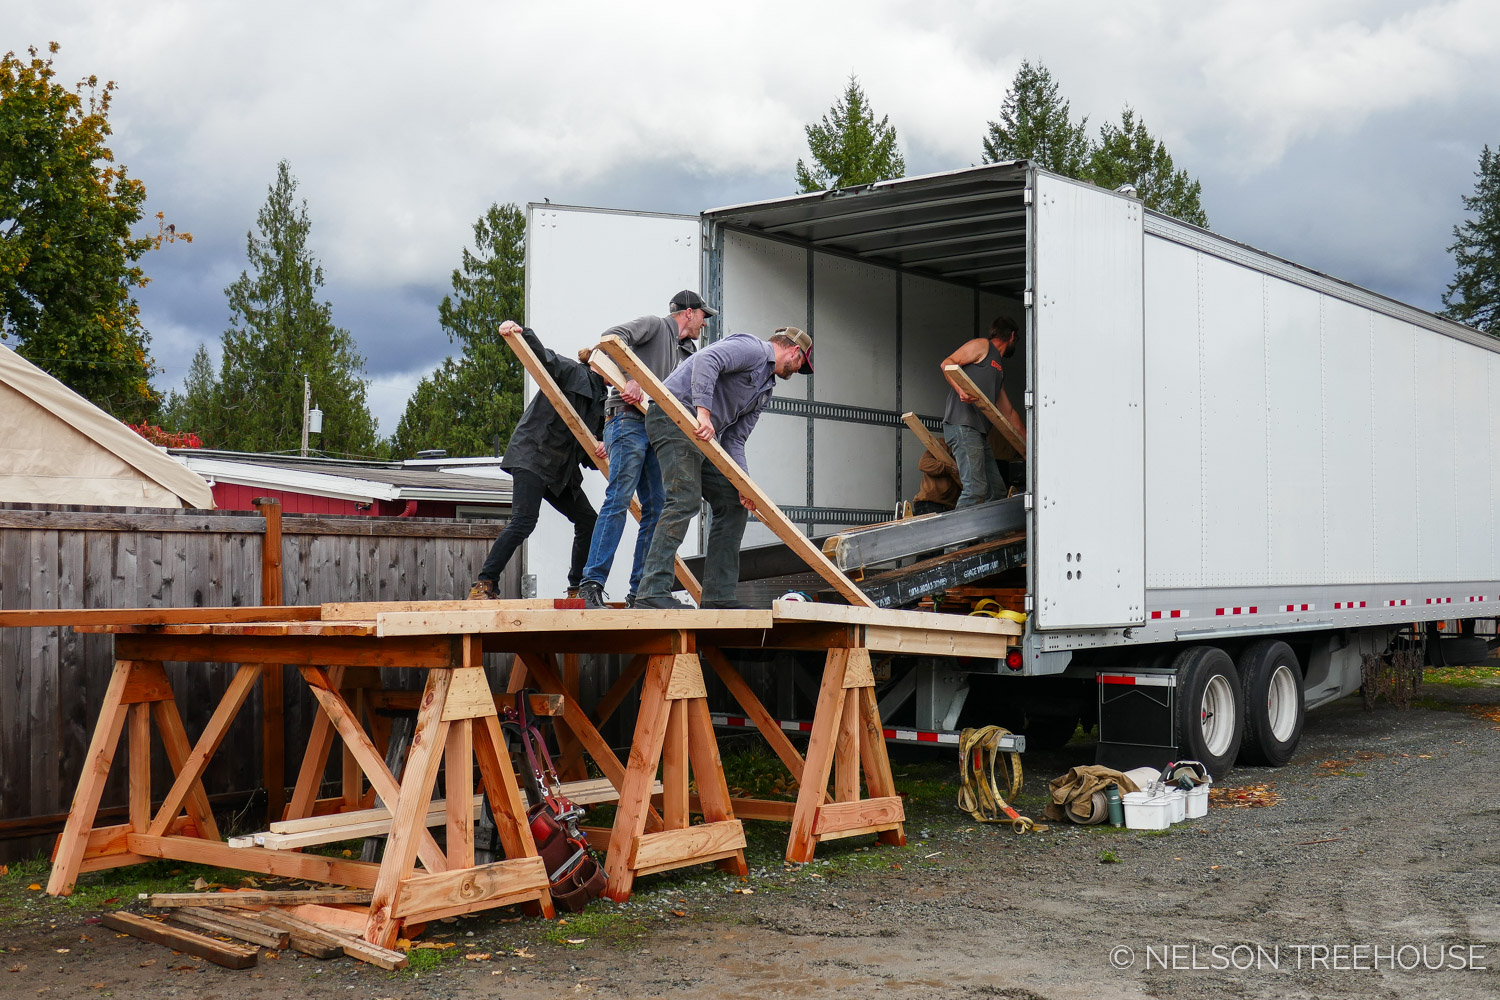  Nelson Treehouse Prefab for Treehouse Utopia - using 2x4's to load metal into truck 